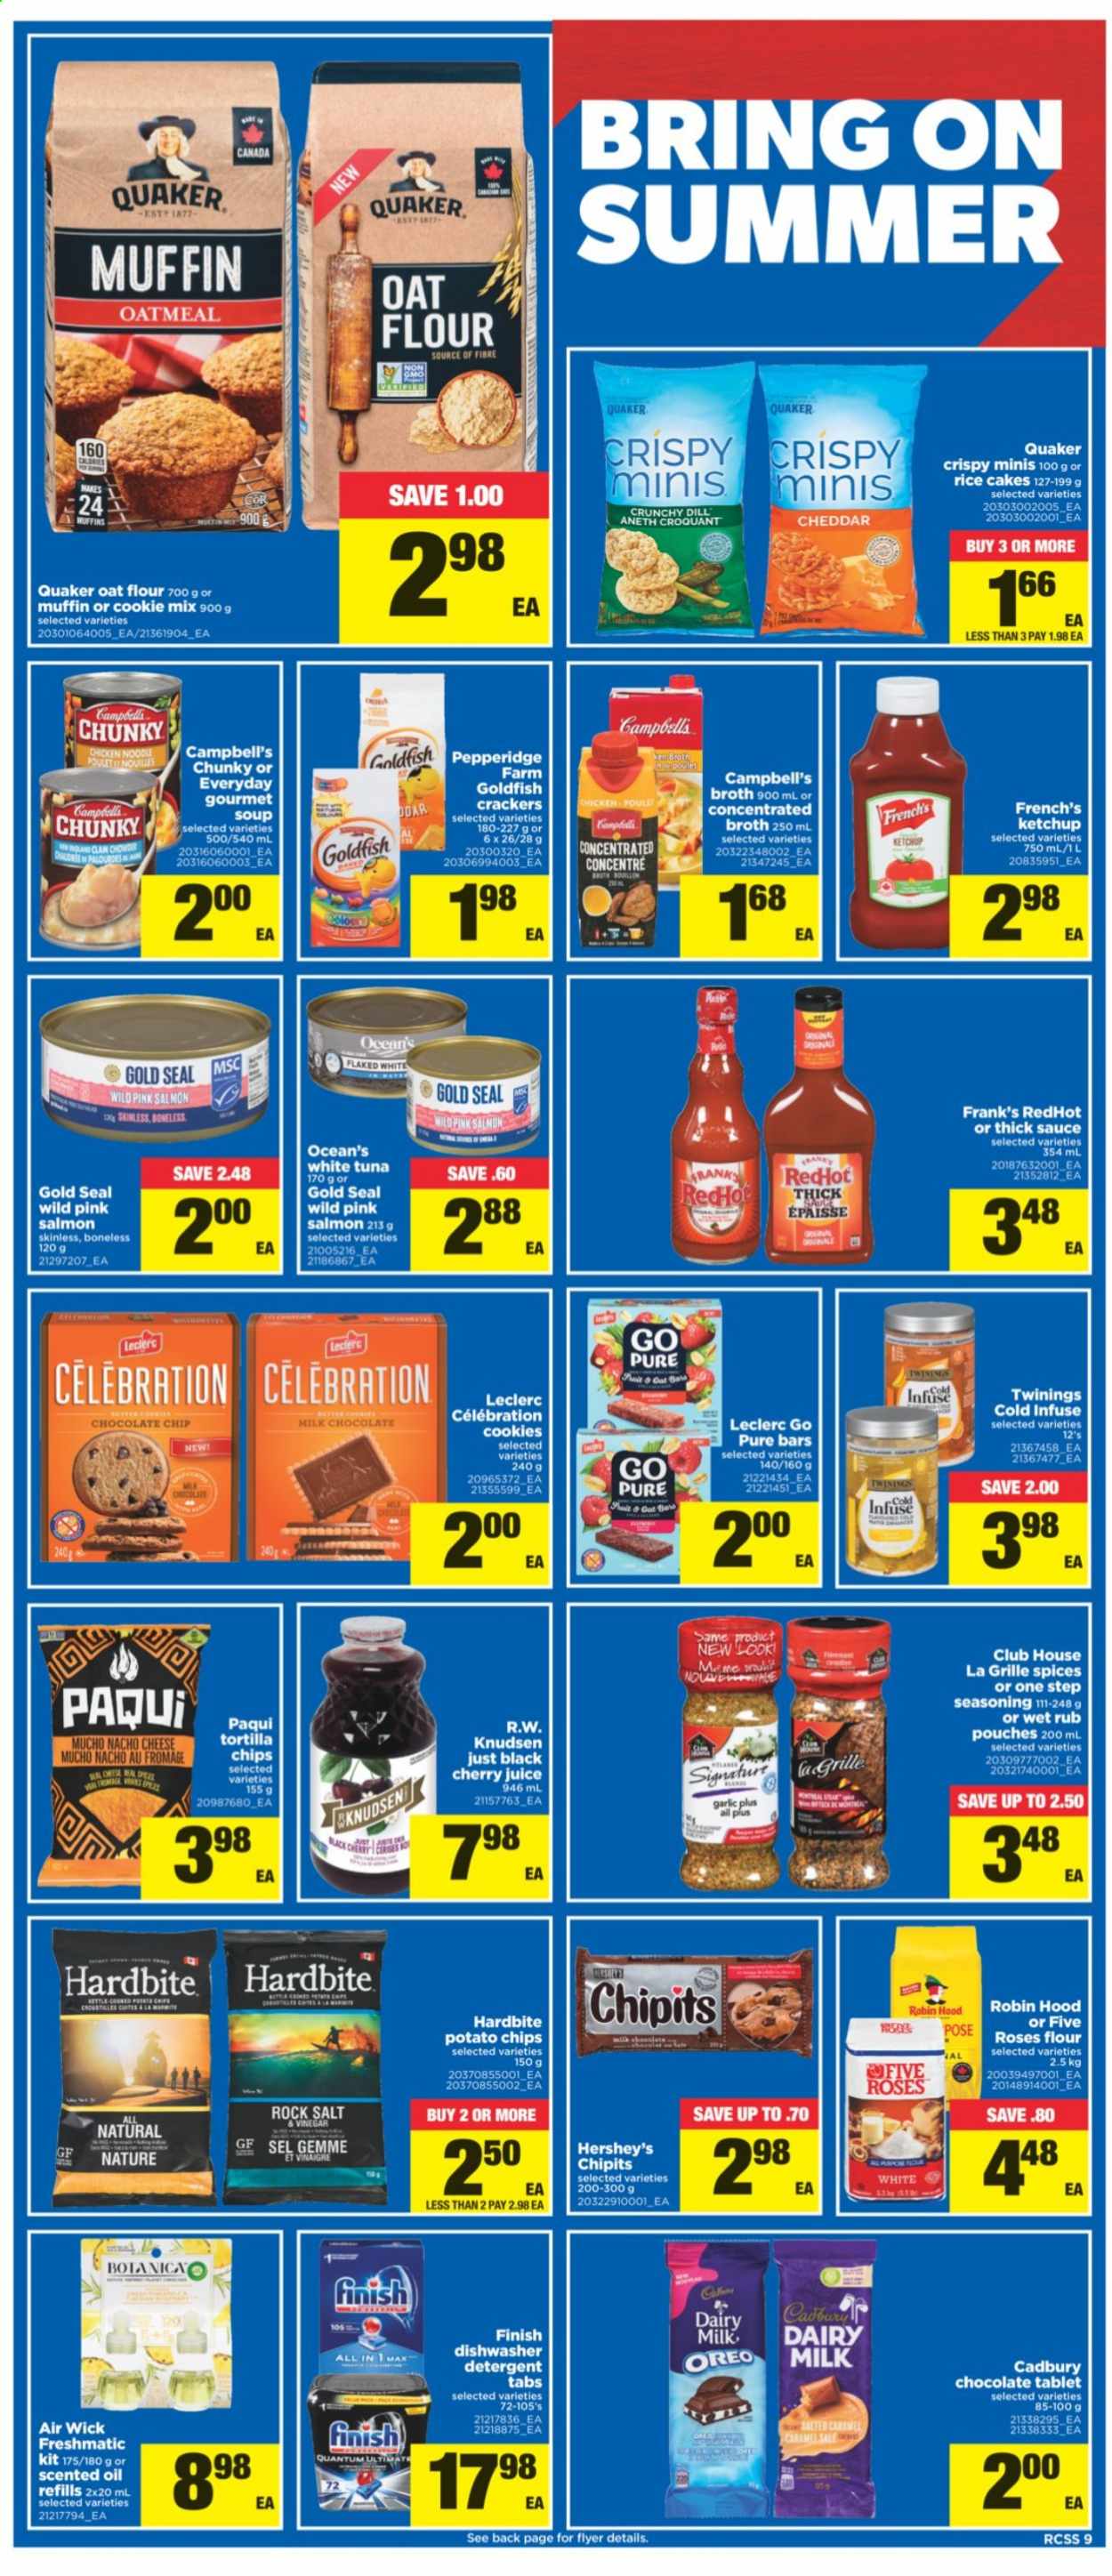 thumbnail - Real Canadian Superstore Flyer - July 29, 2021 - August 04, 2021 - Sales products - tablet, garlic, cherries, clams, salmon, tuna, Campbell's, soup, sauce, Quaker, noodles, cheese, Hershey's, milk chocolate, Celebration, crackers, Cadbury, Dairy Milk, tortilla chips, potato chips, Goldfish, bouillon, oatmeal, oats, broth, dill, spice, oil, cherry juice, juice, Twinings, Air Wick, scented oil, Oreo, chips. Page 9.